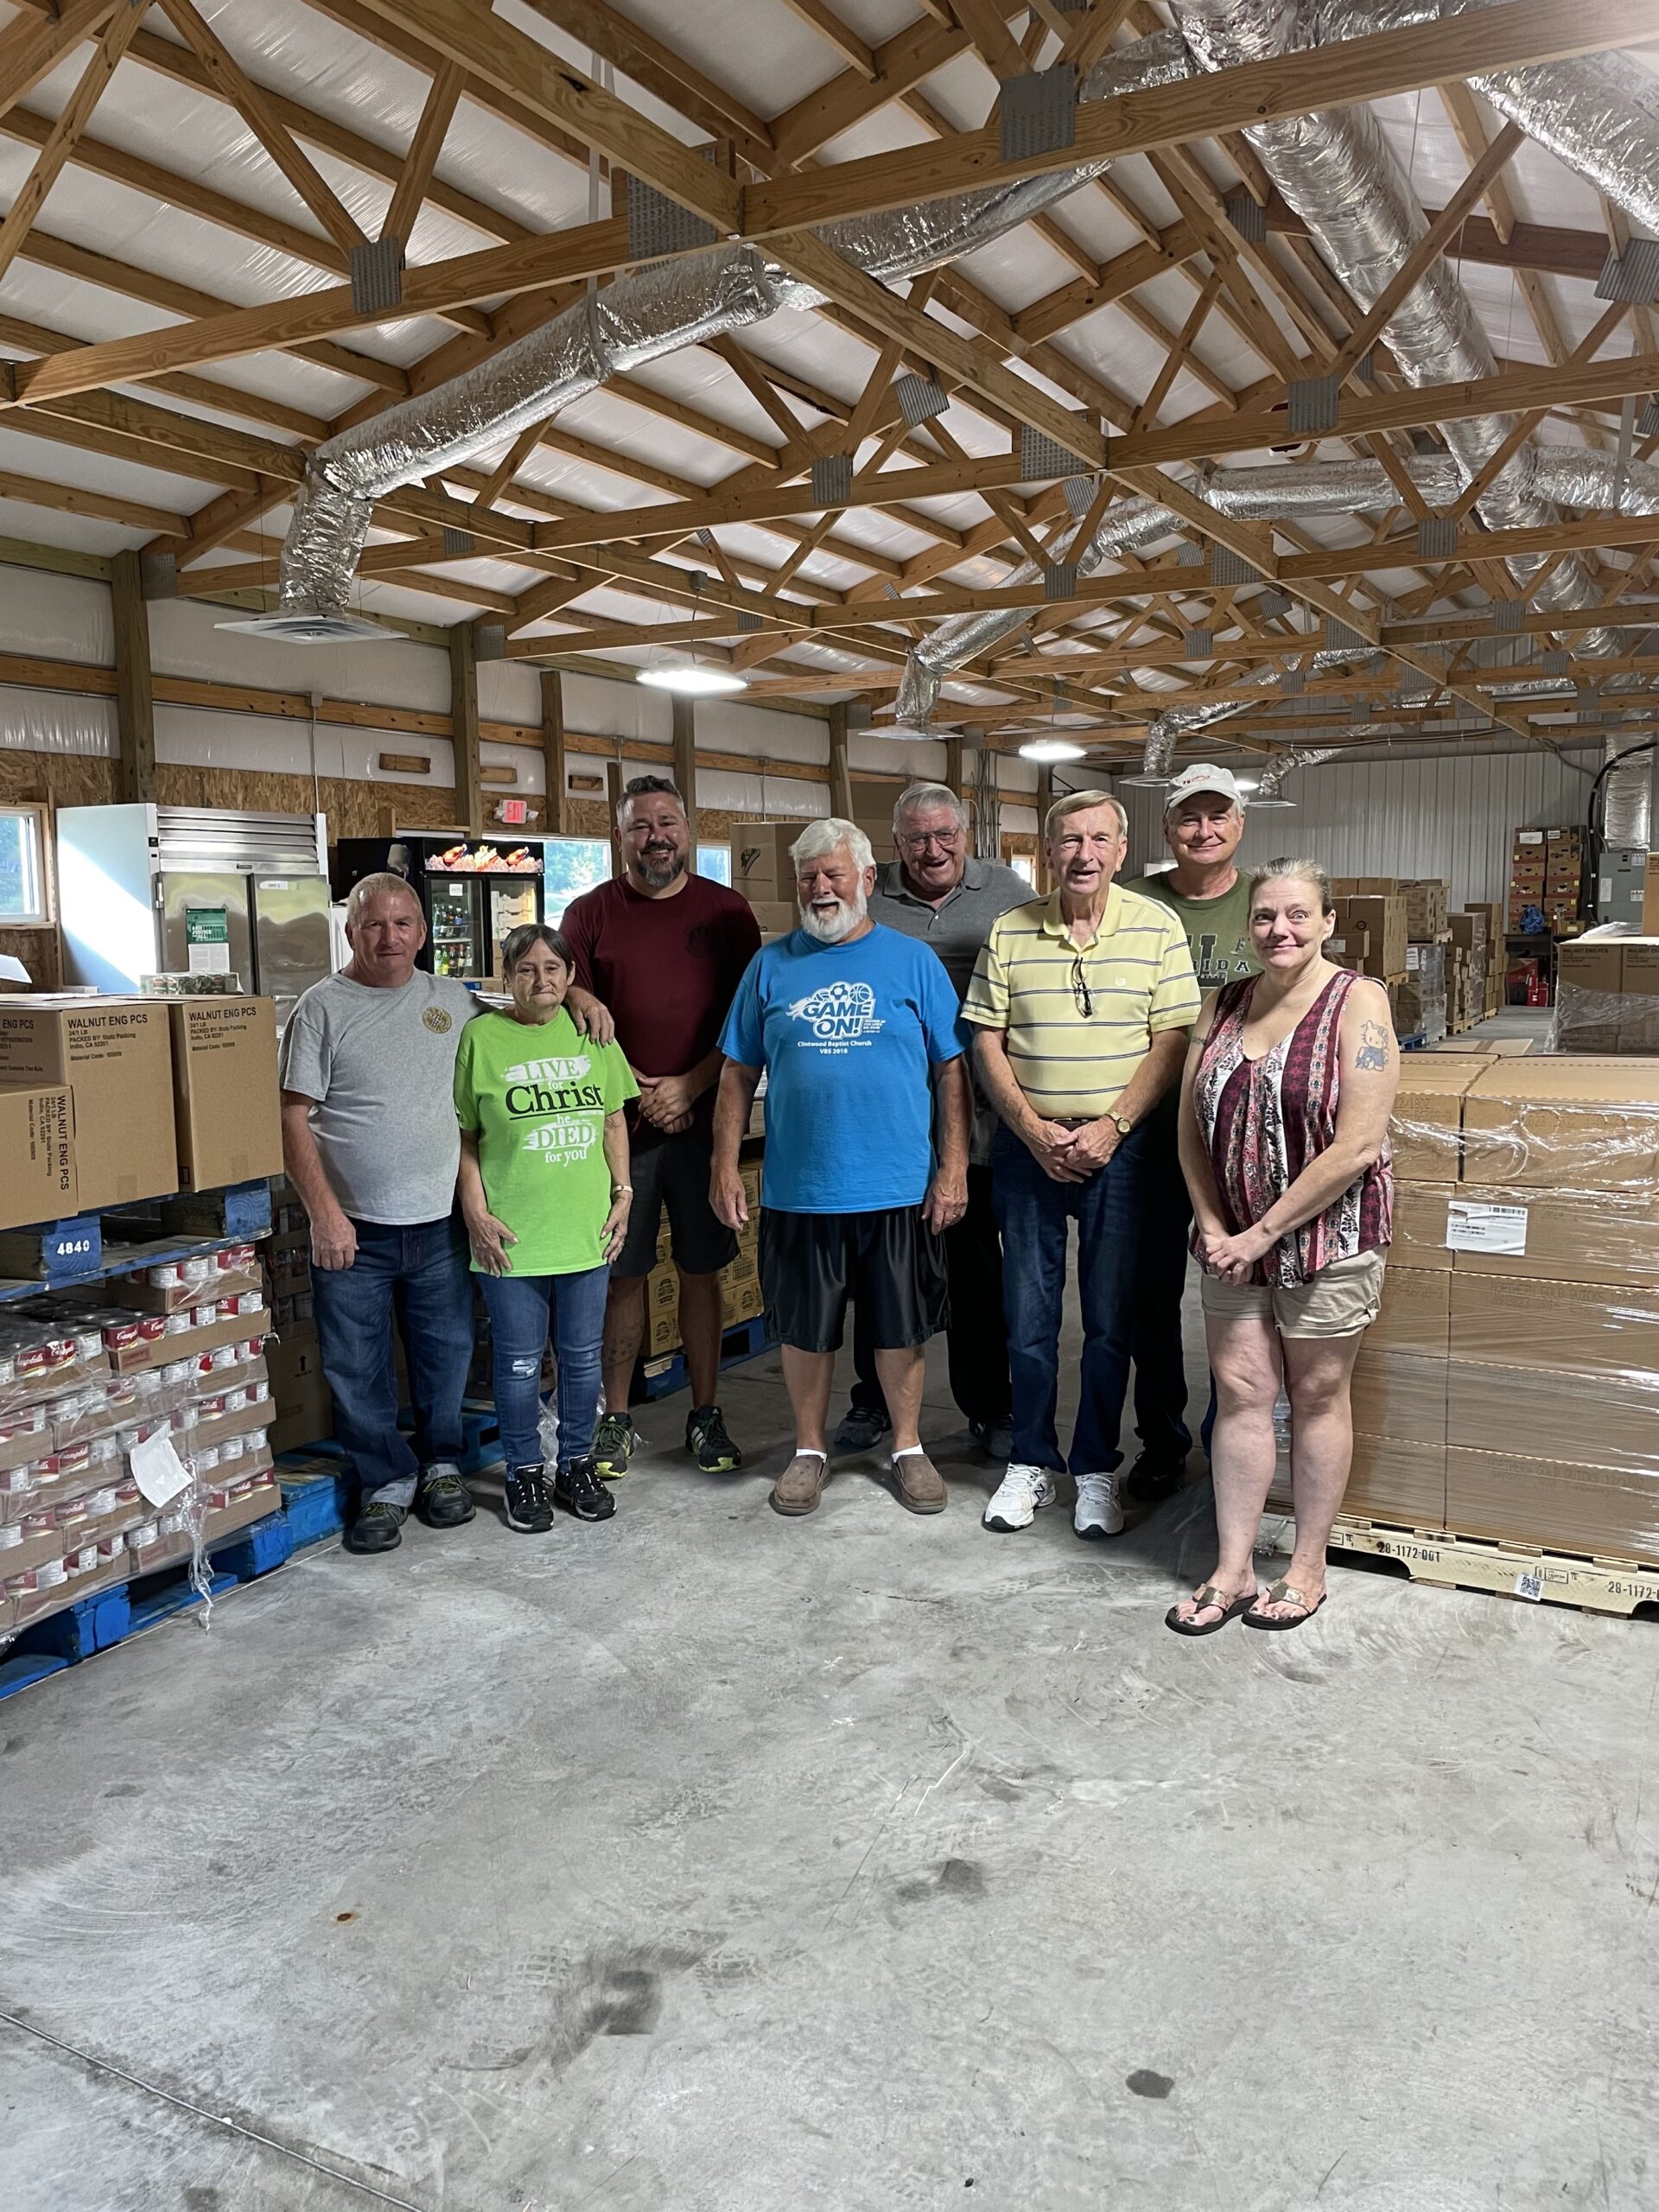 UTILITY, MEDICAL AND FOOD ASSISTANCE IN APPALACHIA